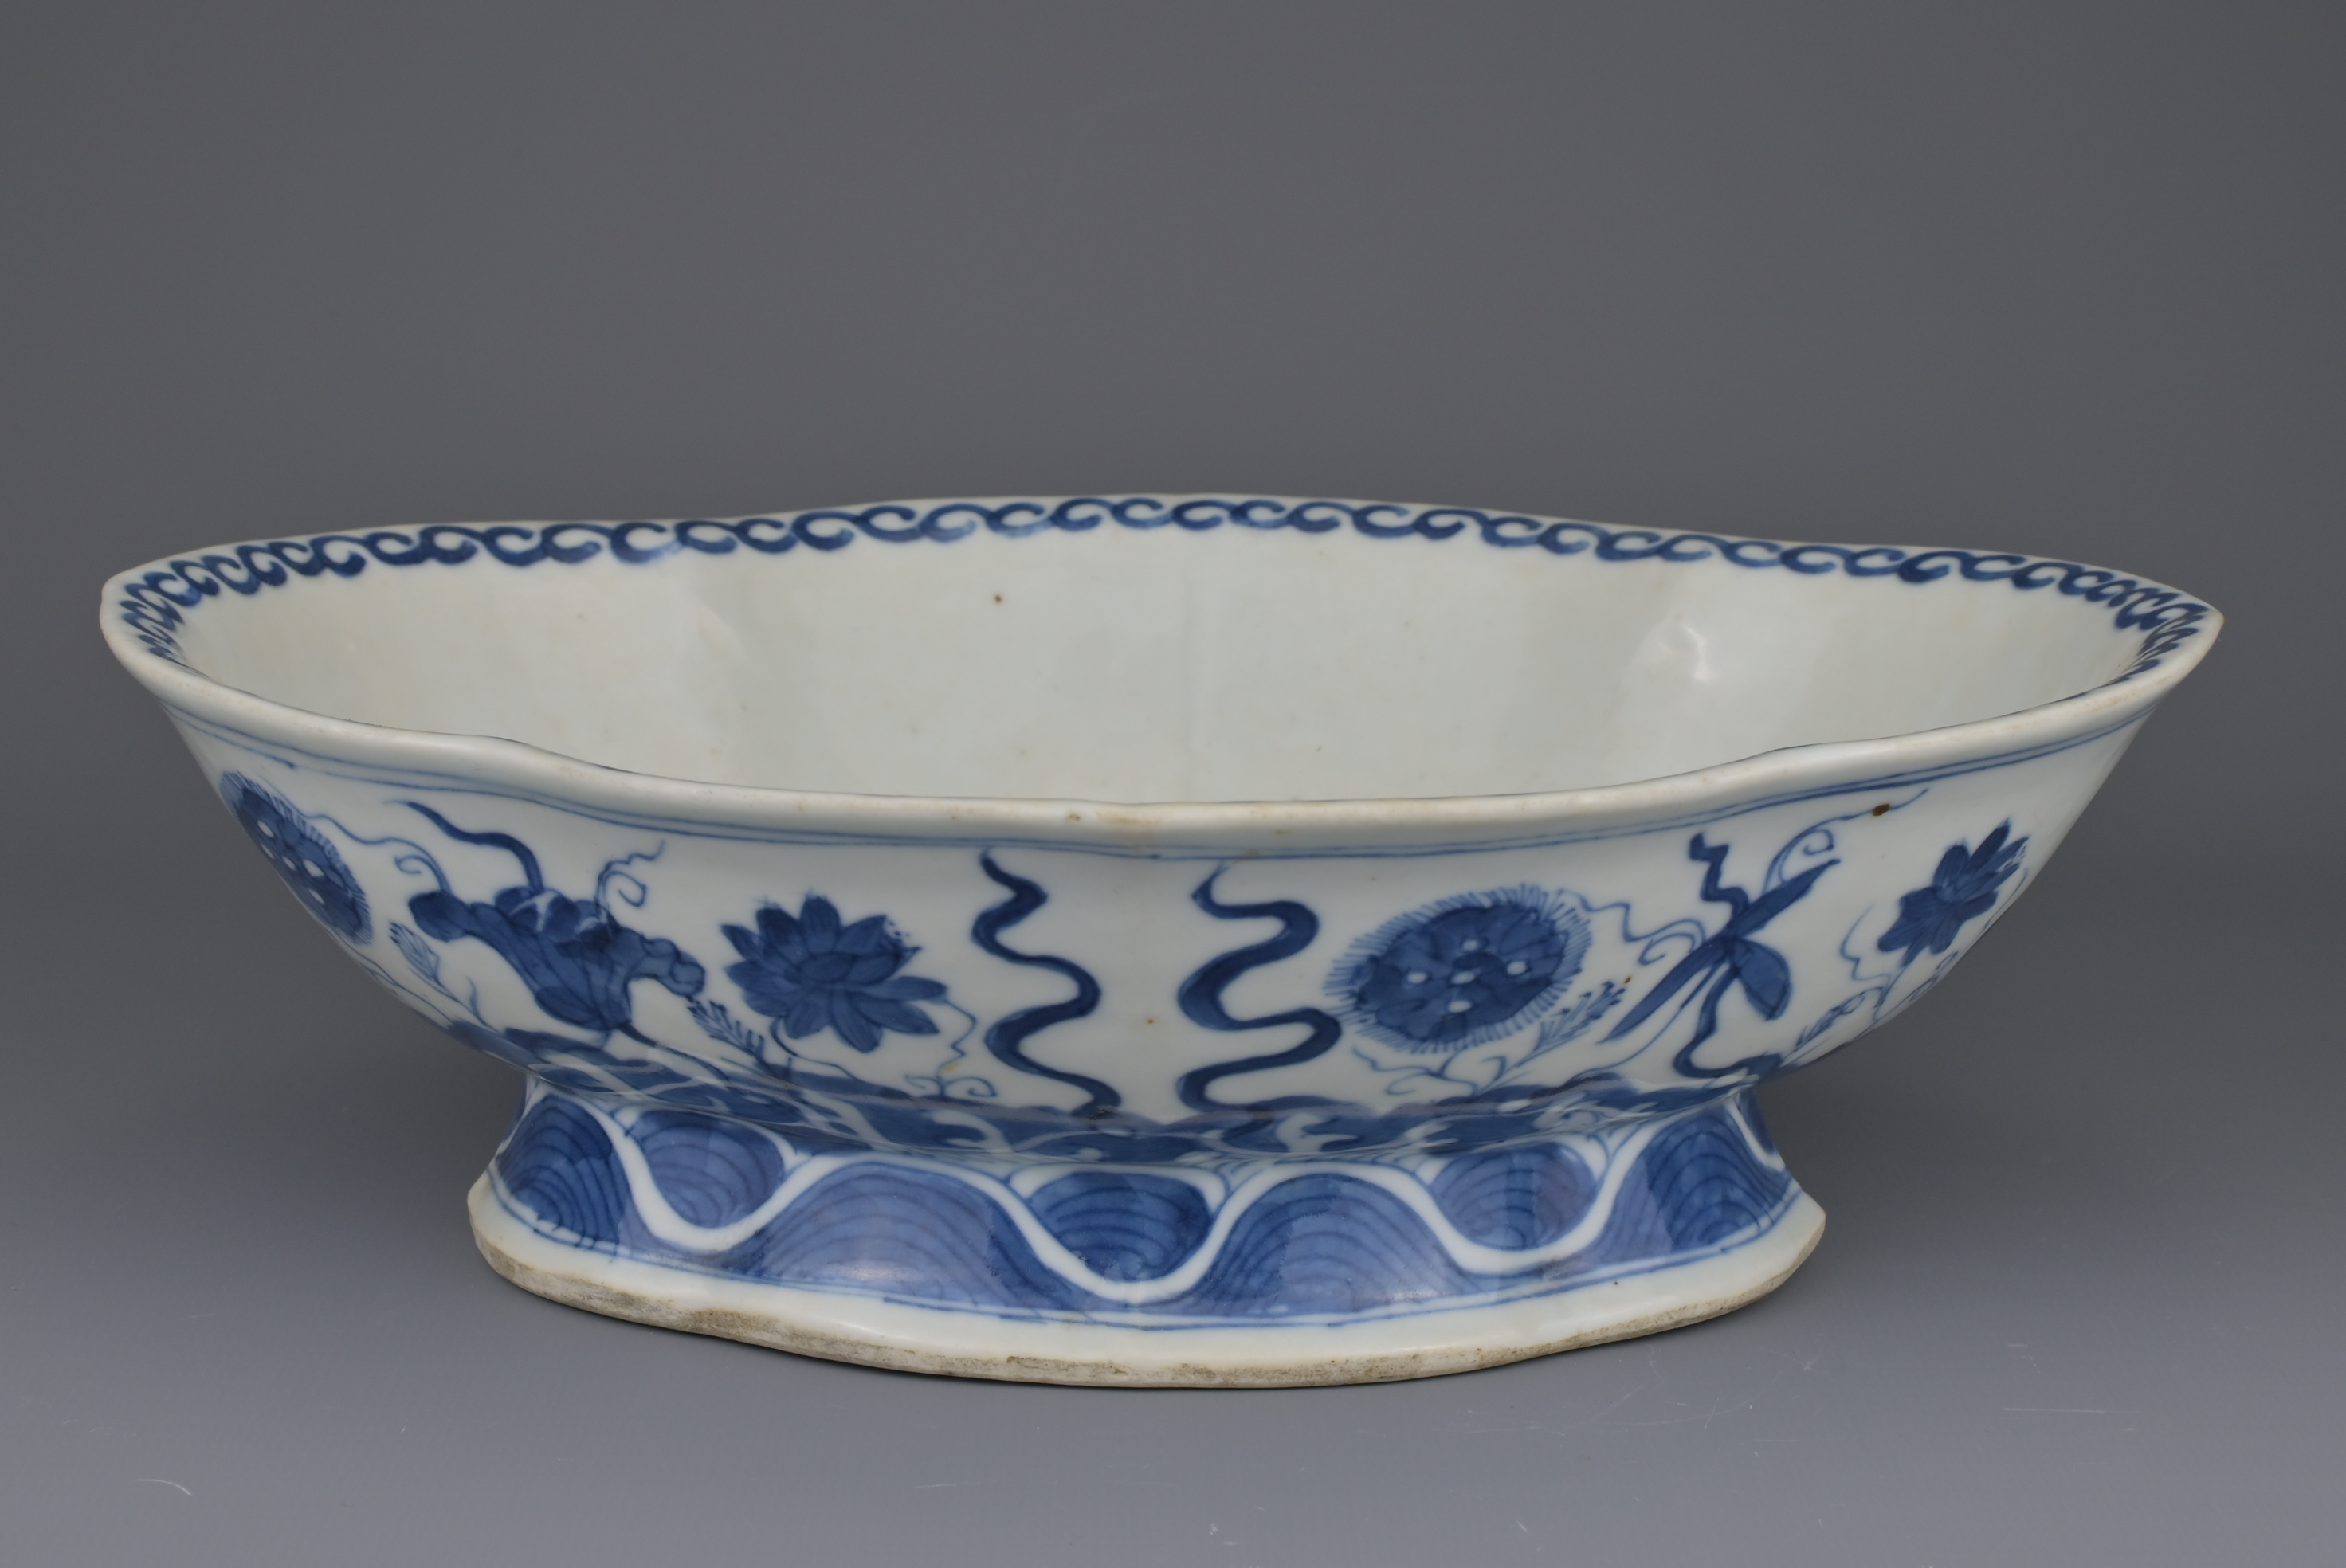 CHINESE BLUE AND WHITE LOBED PORCELAIN BOWL, TONGZHI MARK AND PERIOD, 19th CENTURY - Image 2 of 10